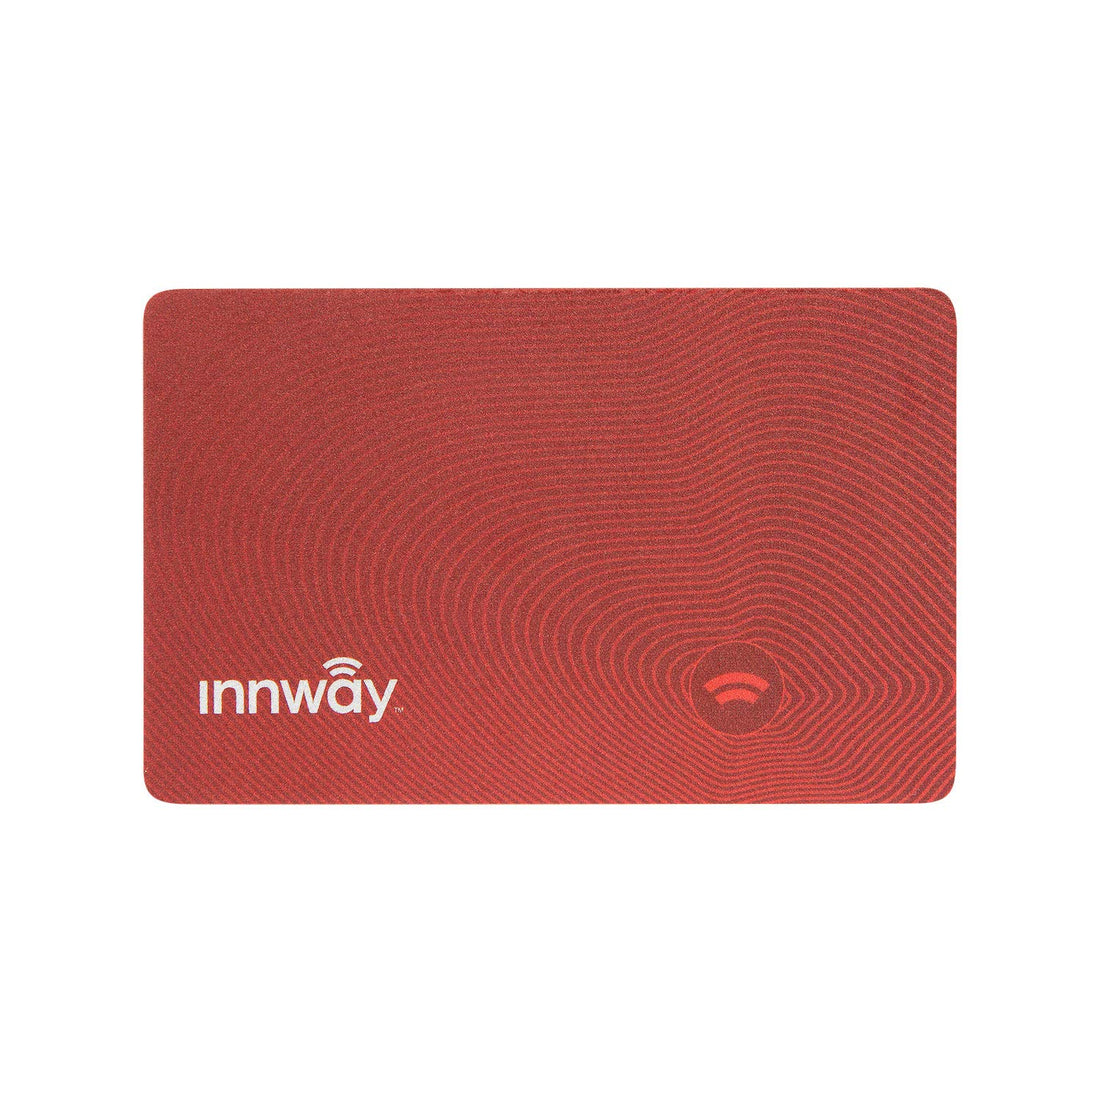 Innway Card - Credit Card Size Rechargeable Bluetooth Finder for Wallet, Passport, Luggage. iOS and Android Compatible. (Red - Limited Edition)